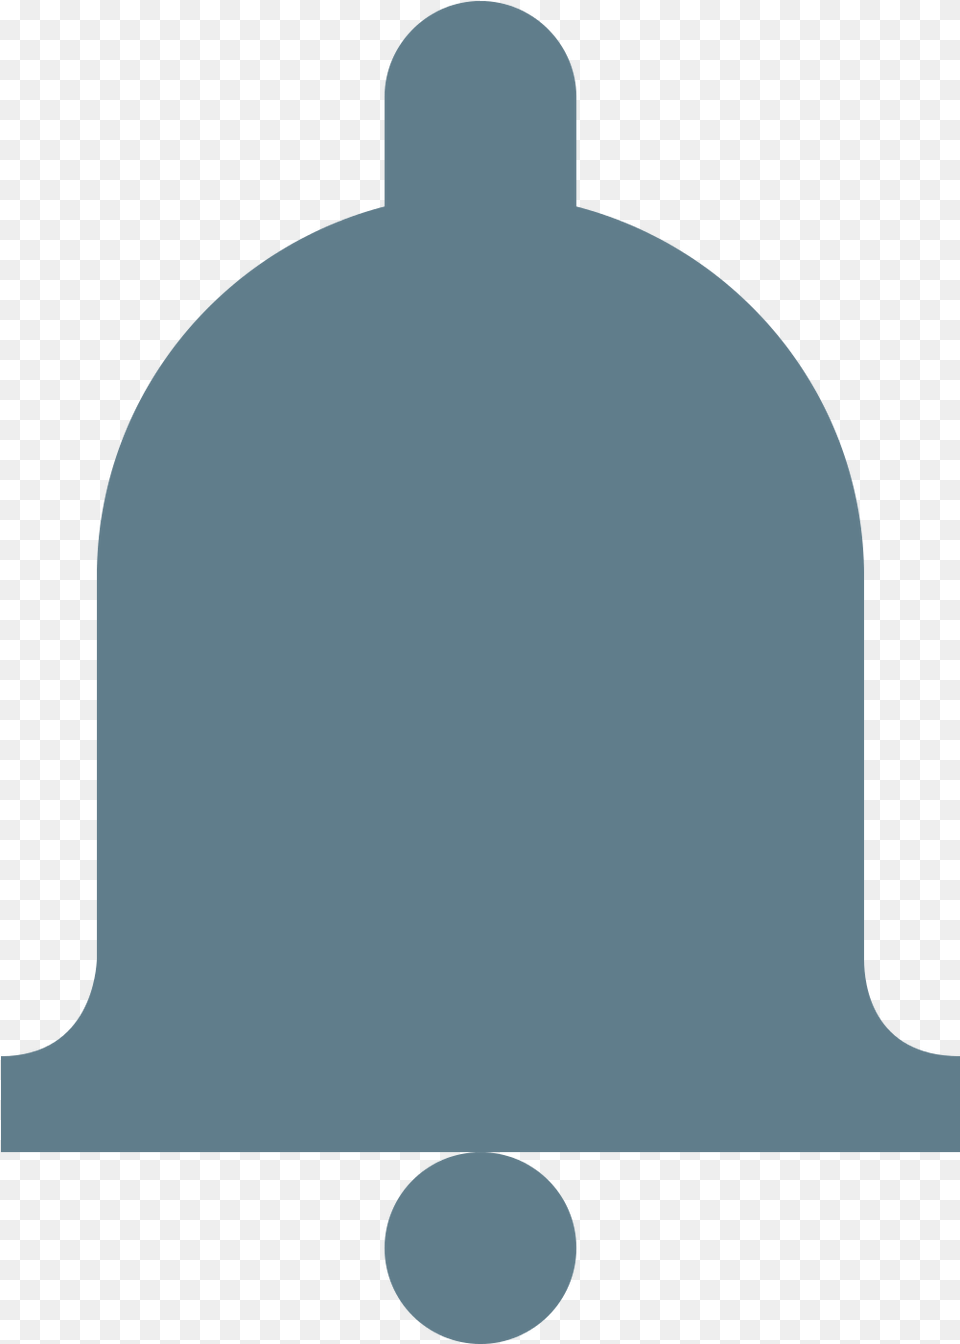 Small Youtube Bell Icon Transparent, Clothing, Hardhat, Helmet, Adult Png Image